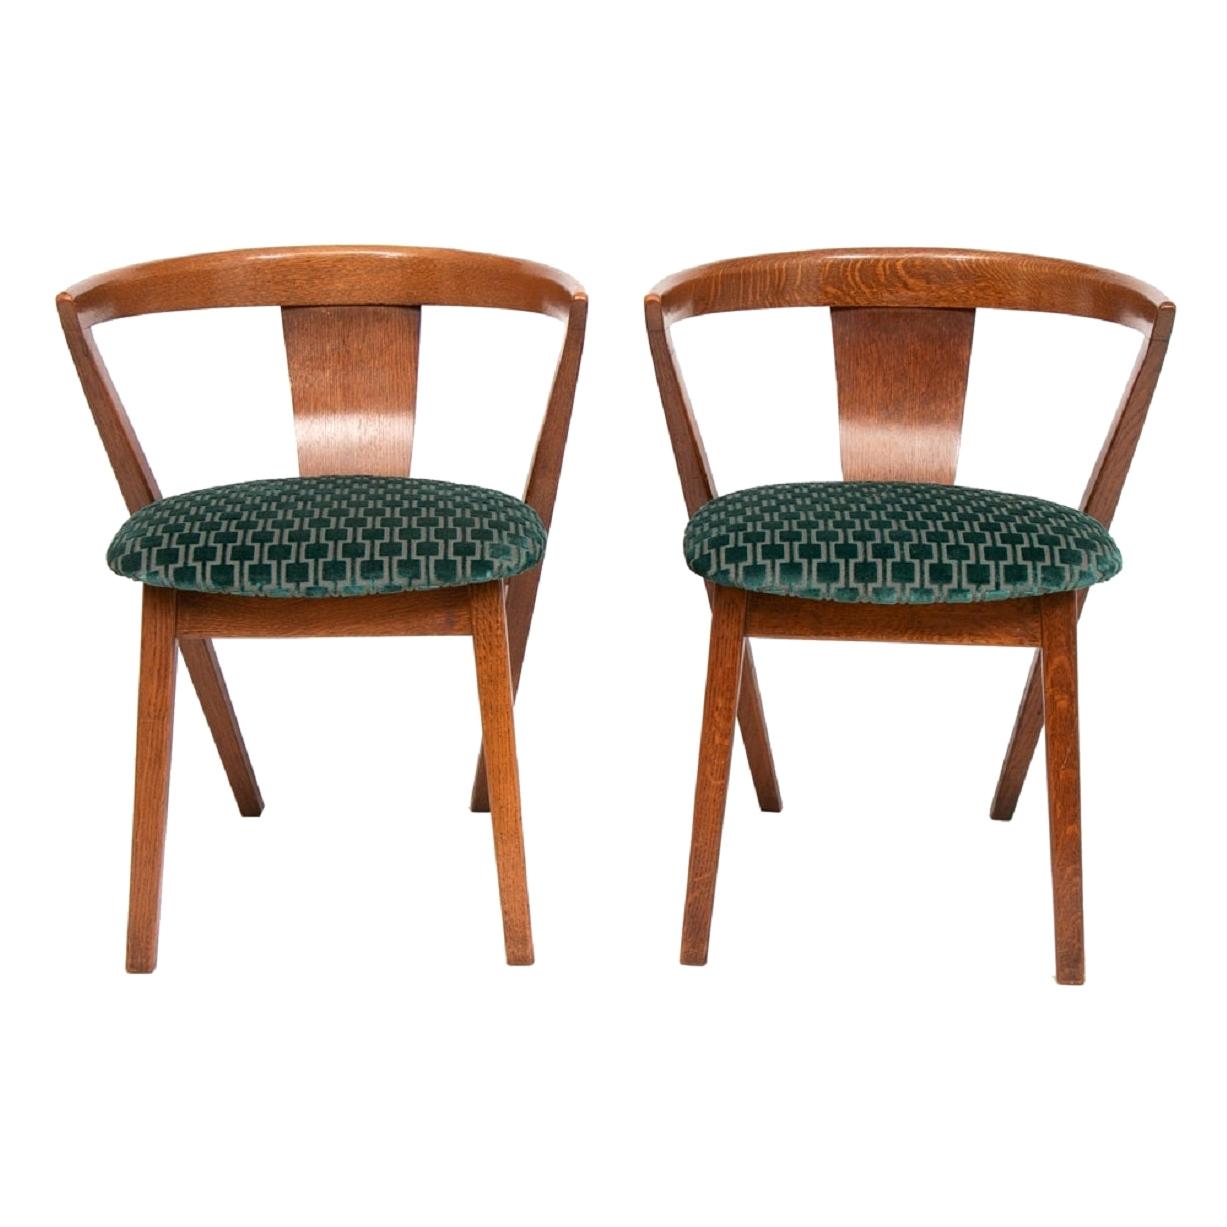 Pair of Modernist Bedroom Chairs, c.1940 For Sale